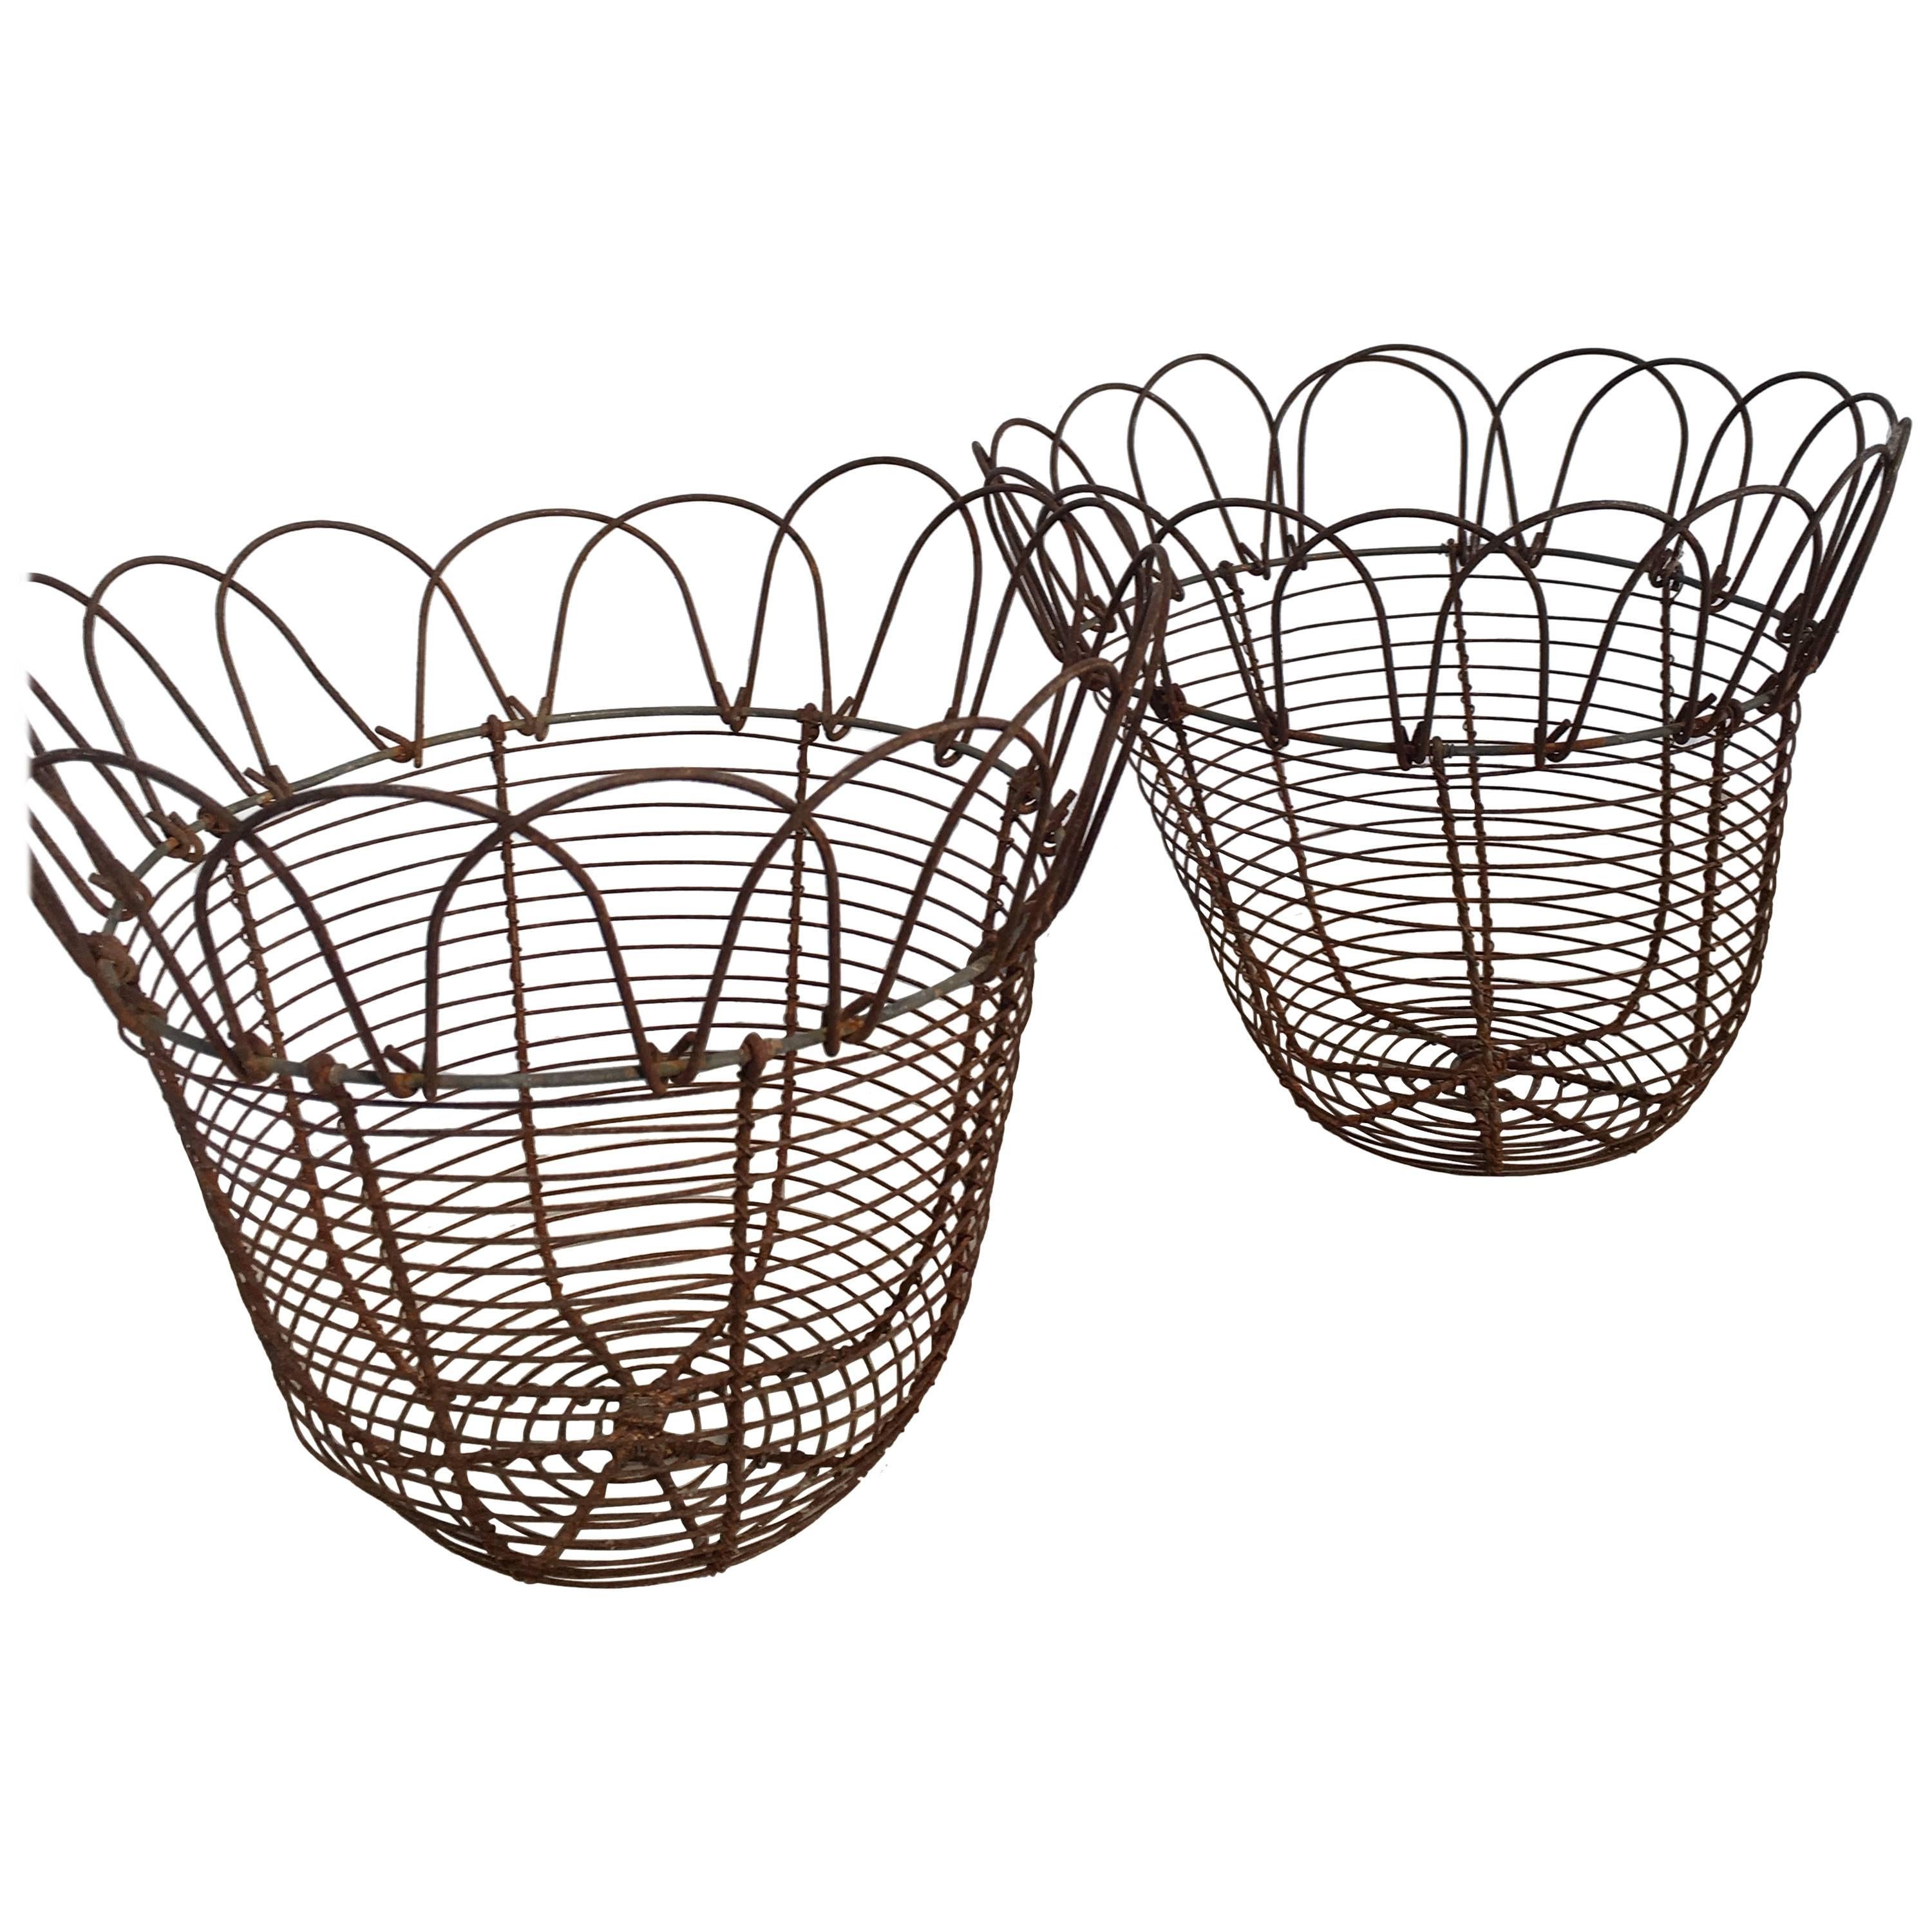 Pair of Edwardian Handcrafted English Wire Egg Baskets